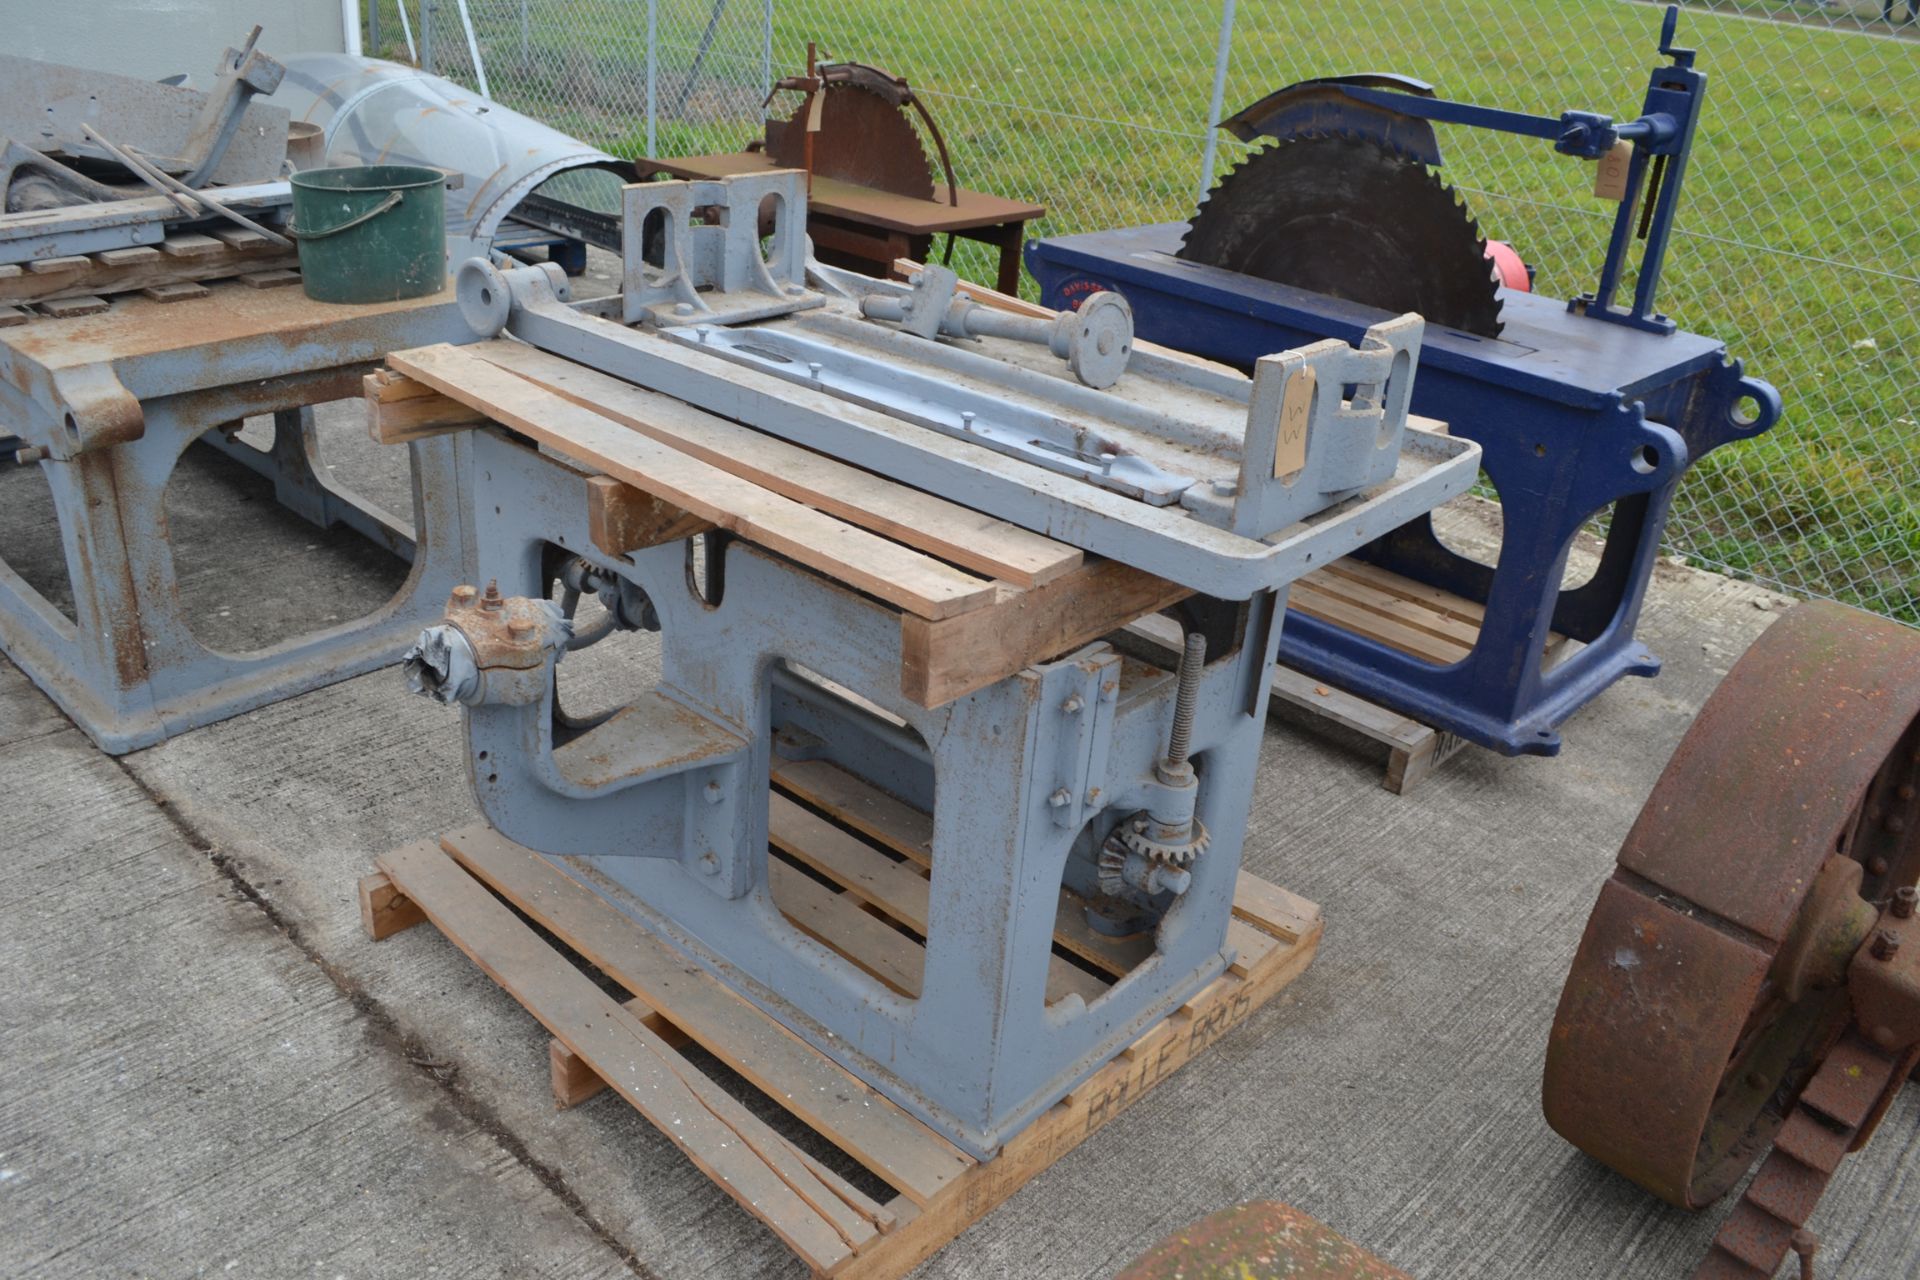 Cast iron rise and fall saw bench base. With parts. - Image 4 of 6